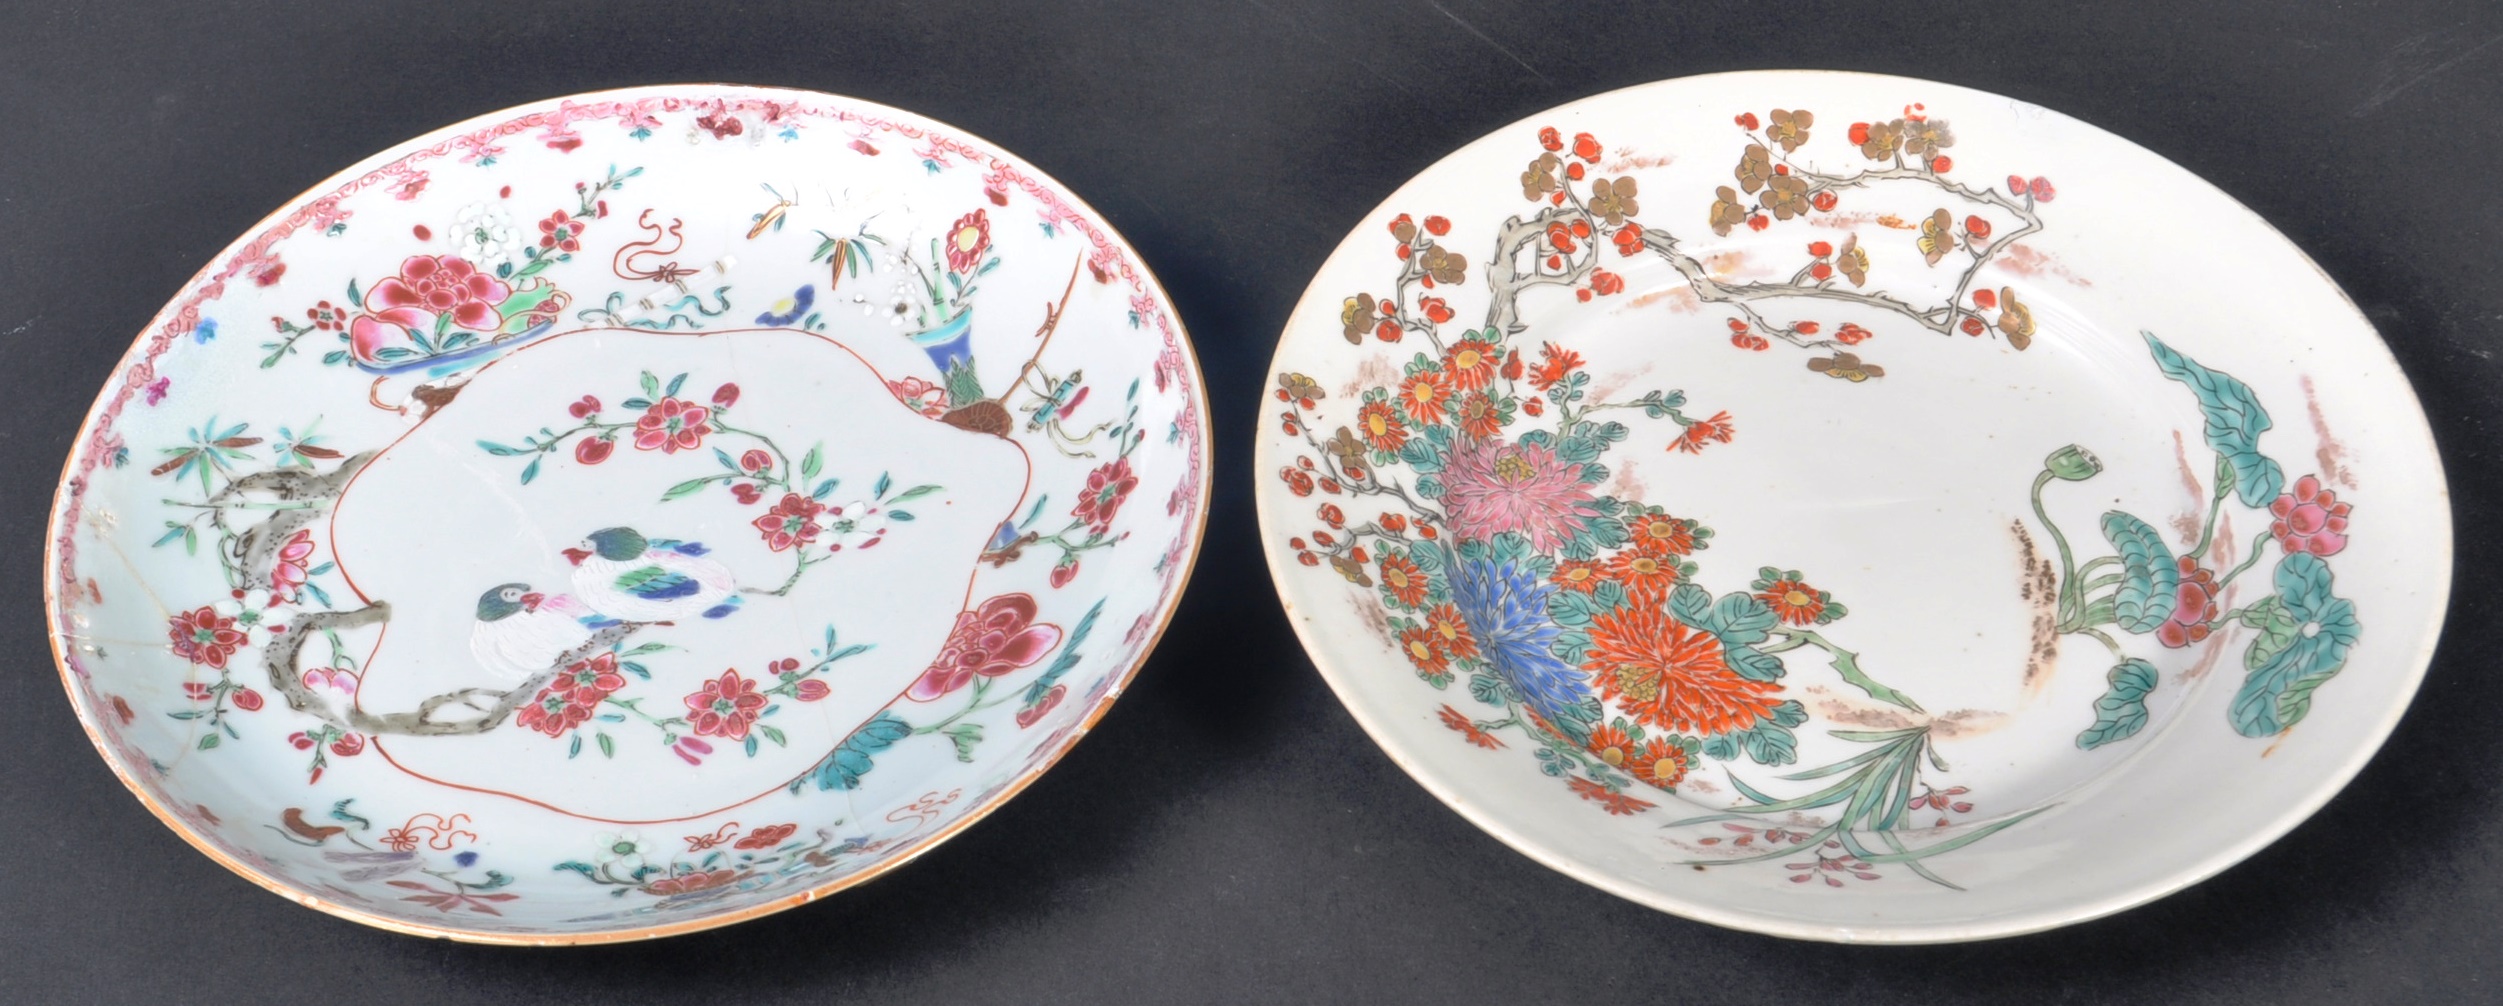 TWO 18TH CENTURY CHINESE QIANLONG PORCELAIN PLATES